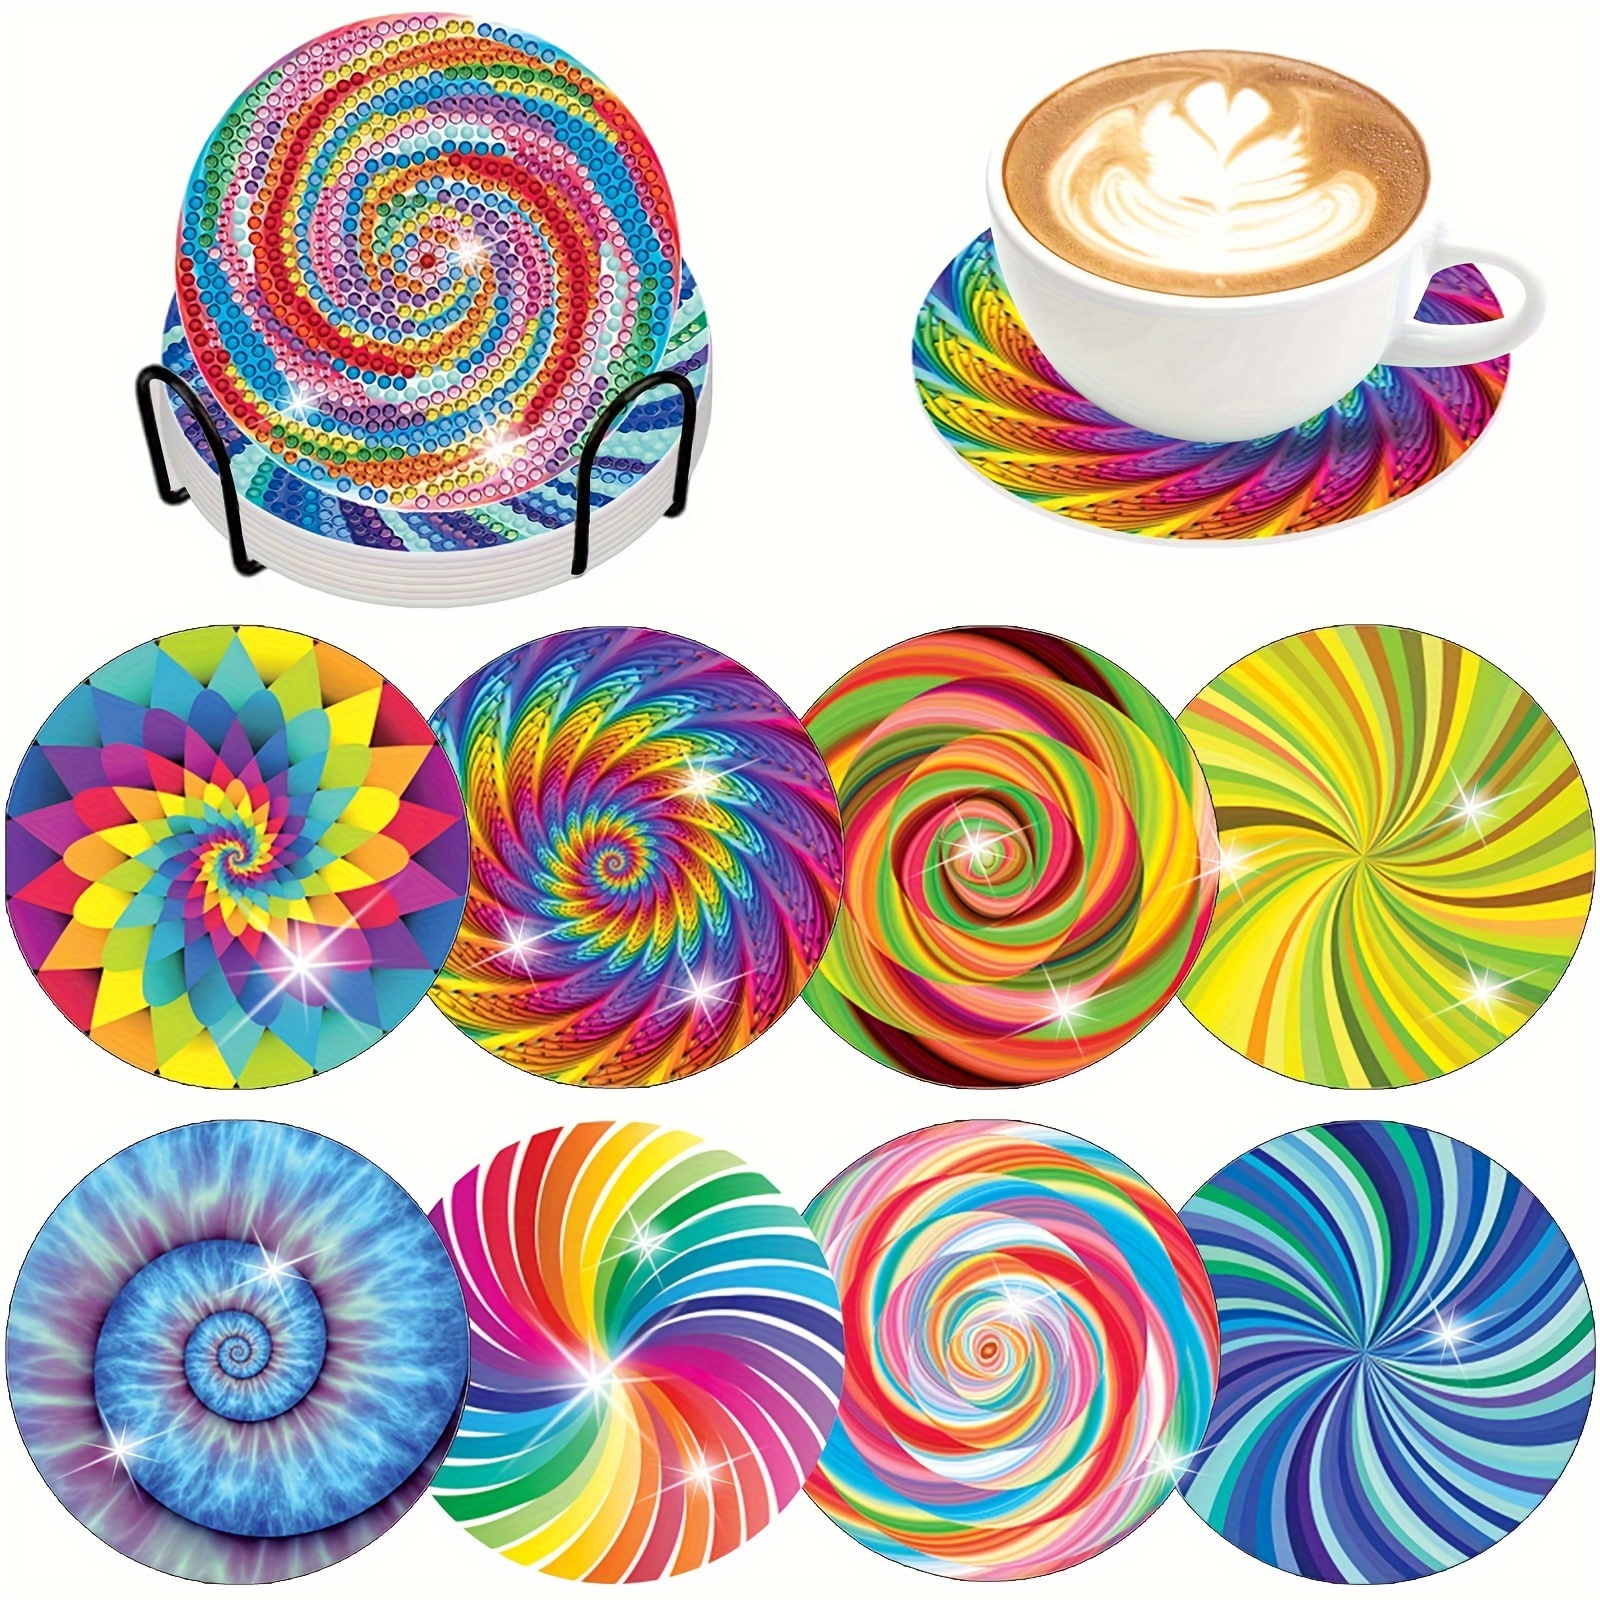 

8pcs/set New 5d Diamond Painting Coasters Kit, Colorful Pattern Coasters, Diy Artificial Crystal Rhinestone Coasters, Heat Insulation Cup Mats With Rack, Christmas Gift